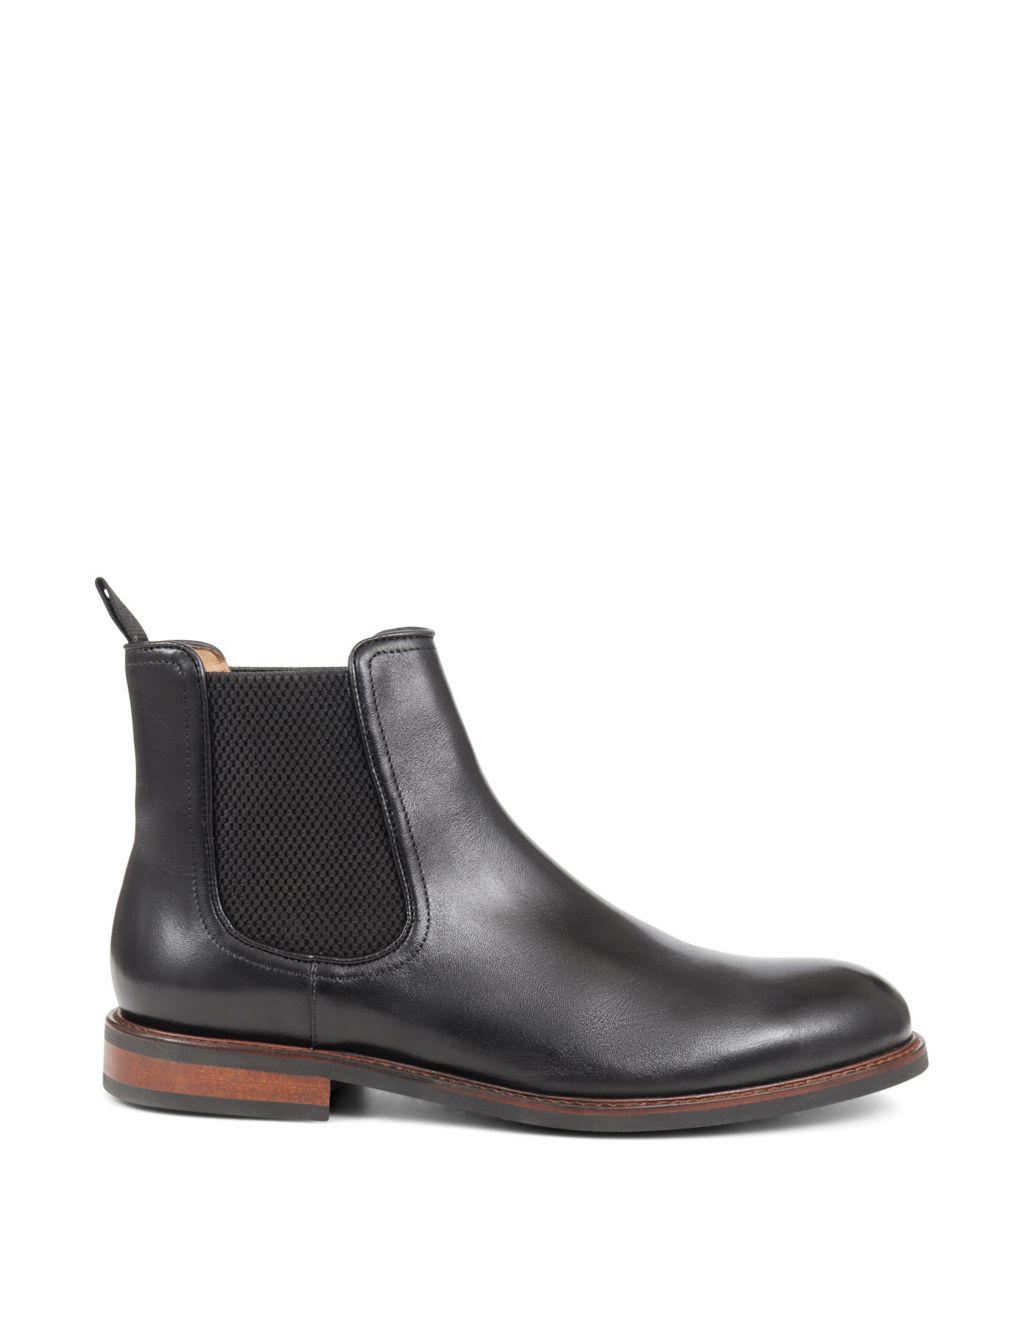 Leather Slip-On Chelsea Boots image 2